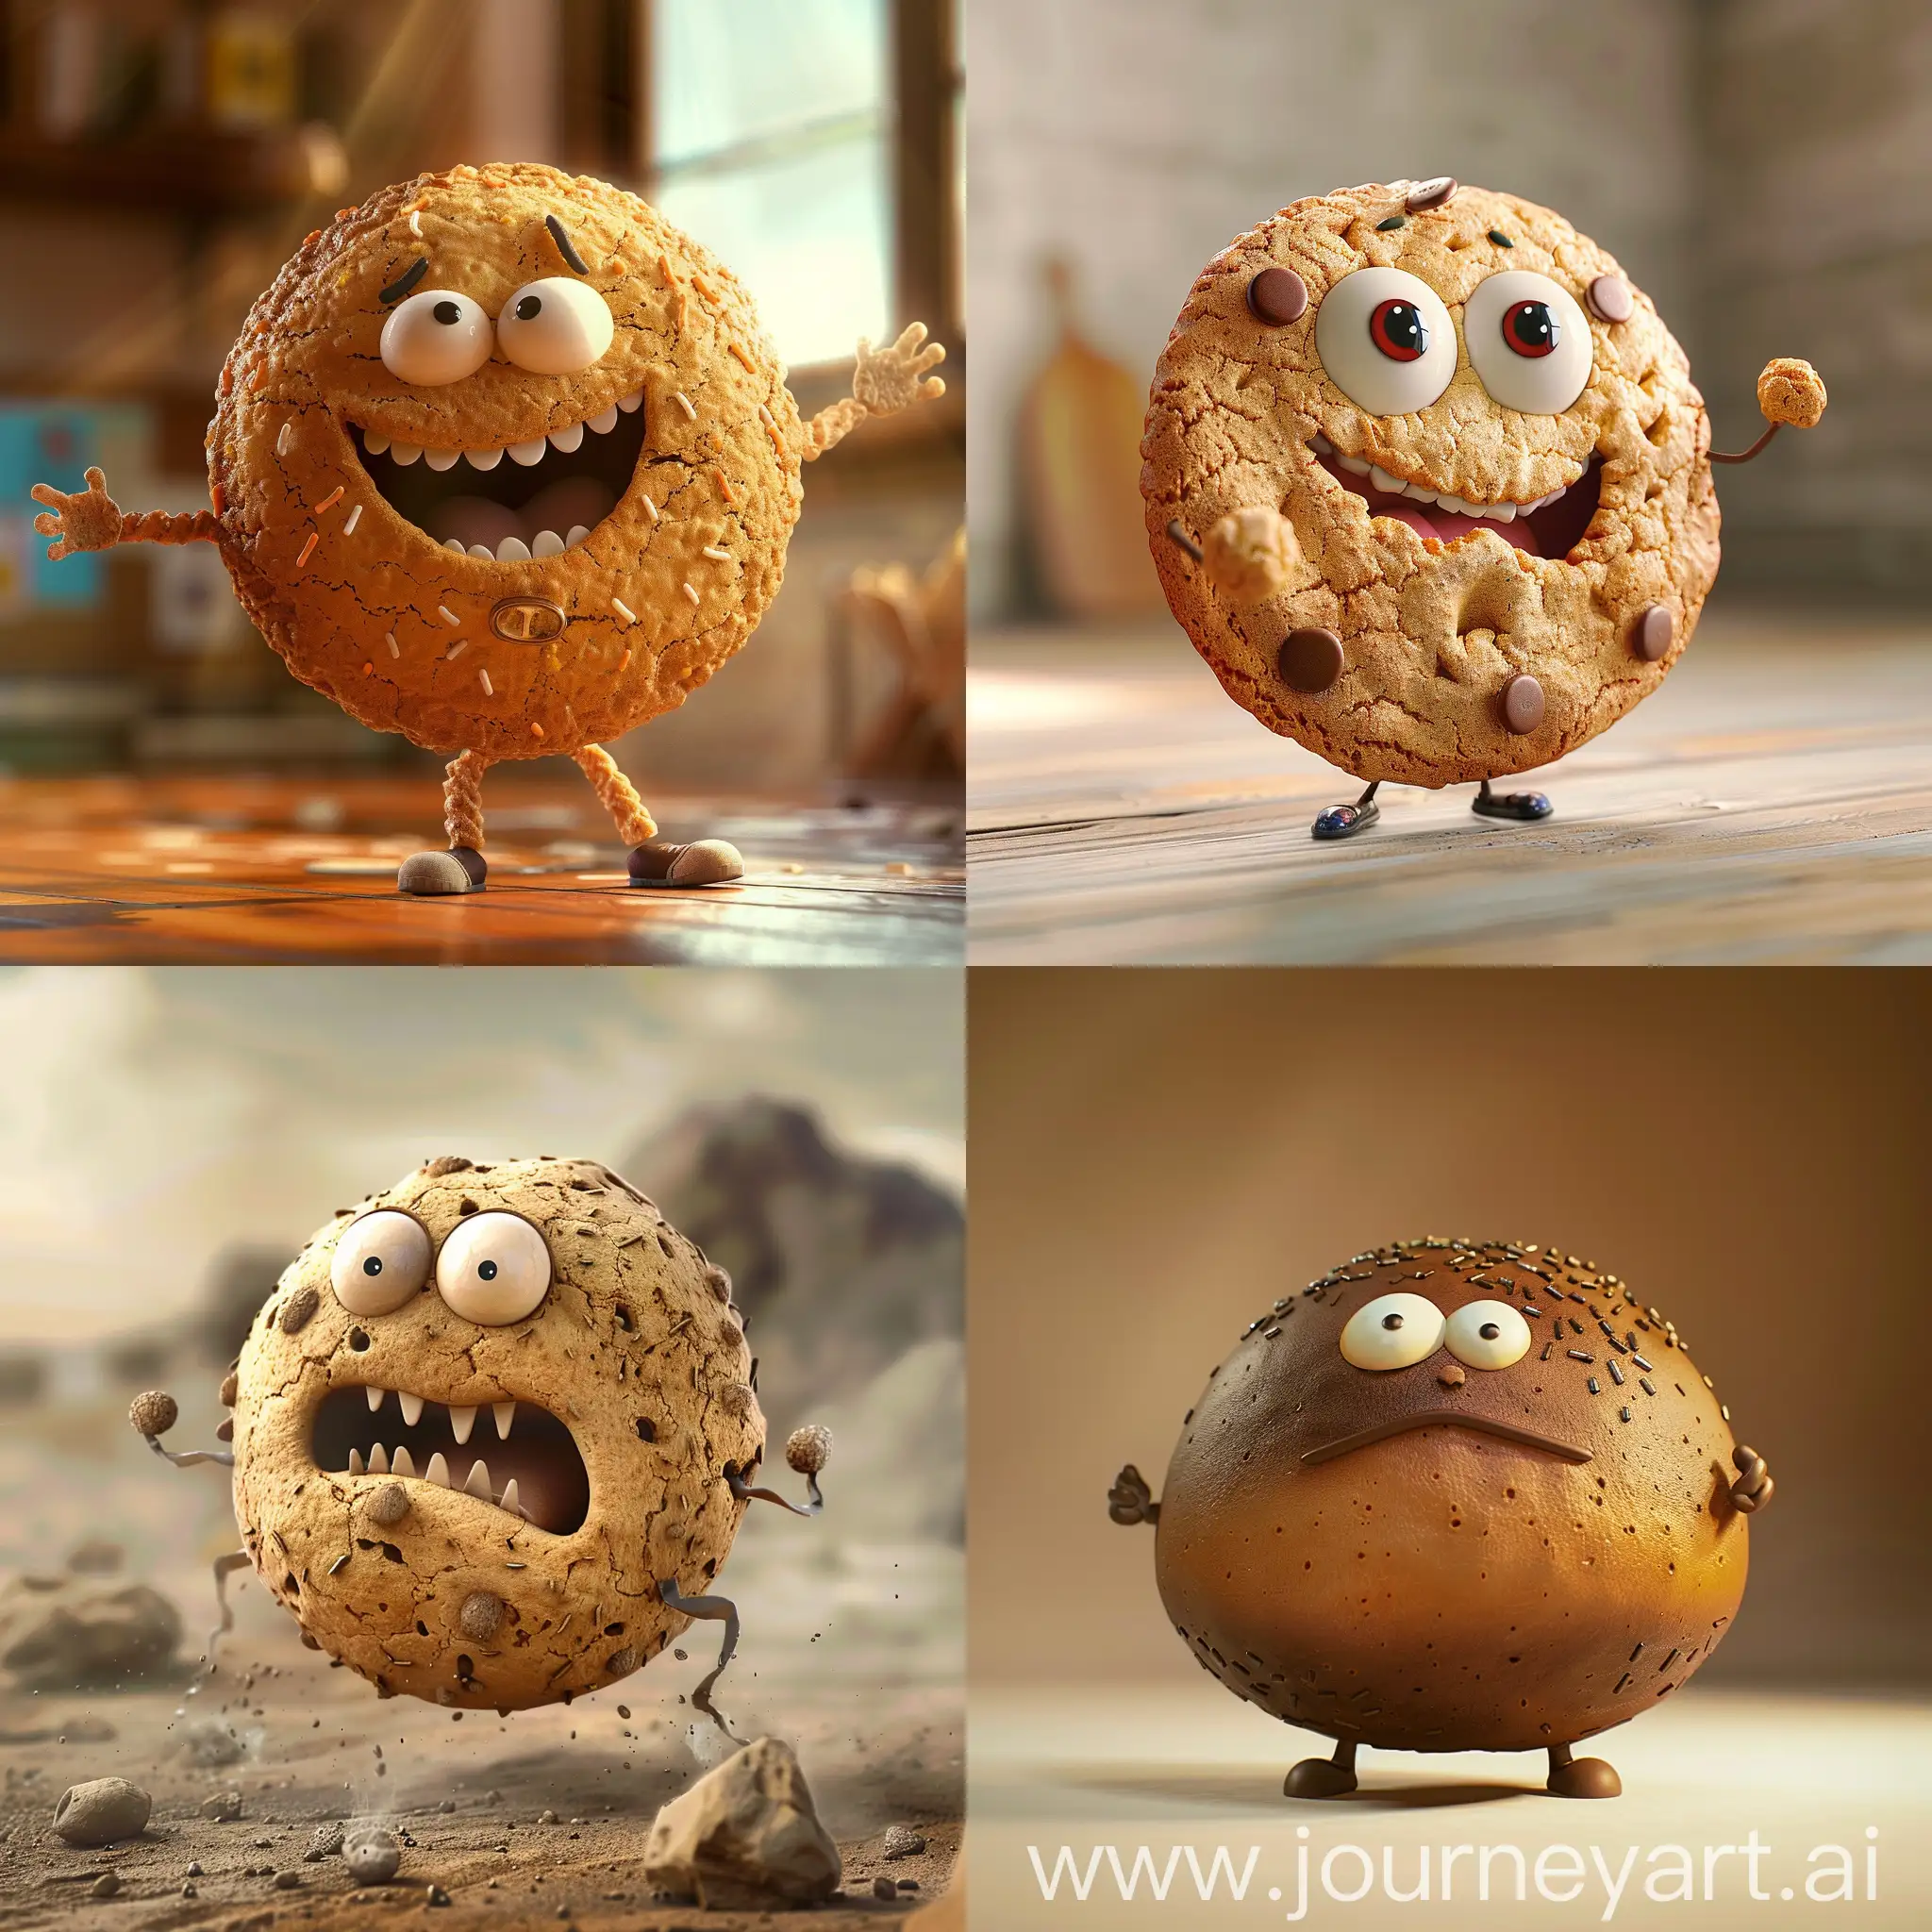 Charming-3D-Animation-Personified-Cookie-Speaks-with-Animated-Grace